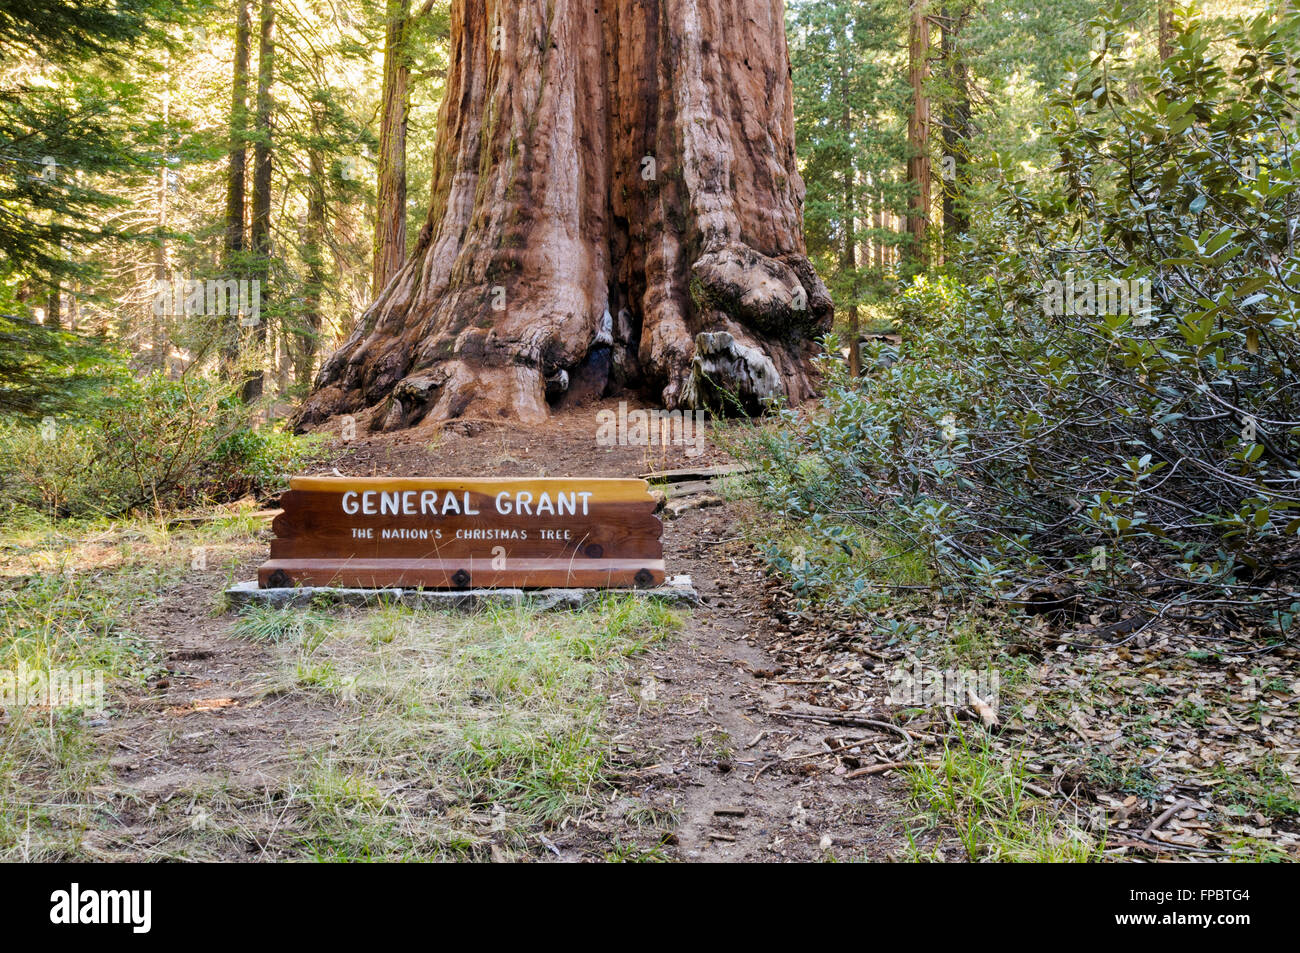 Base of the General Grant Sequoia tree, Grant Grove, Kings Canyon National Park, California, USA Stock Photo